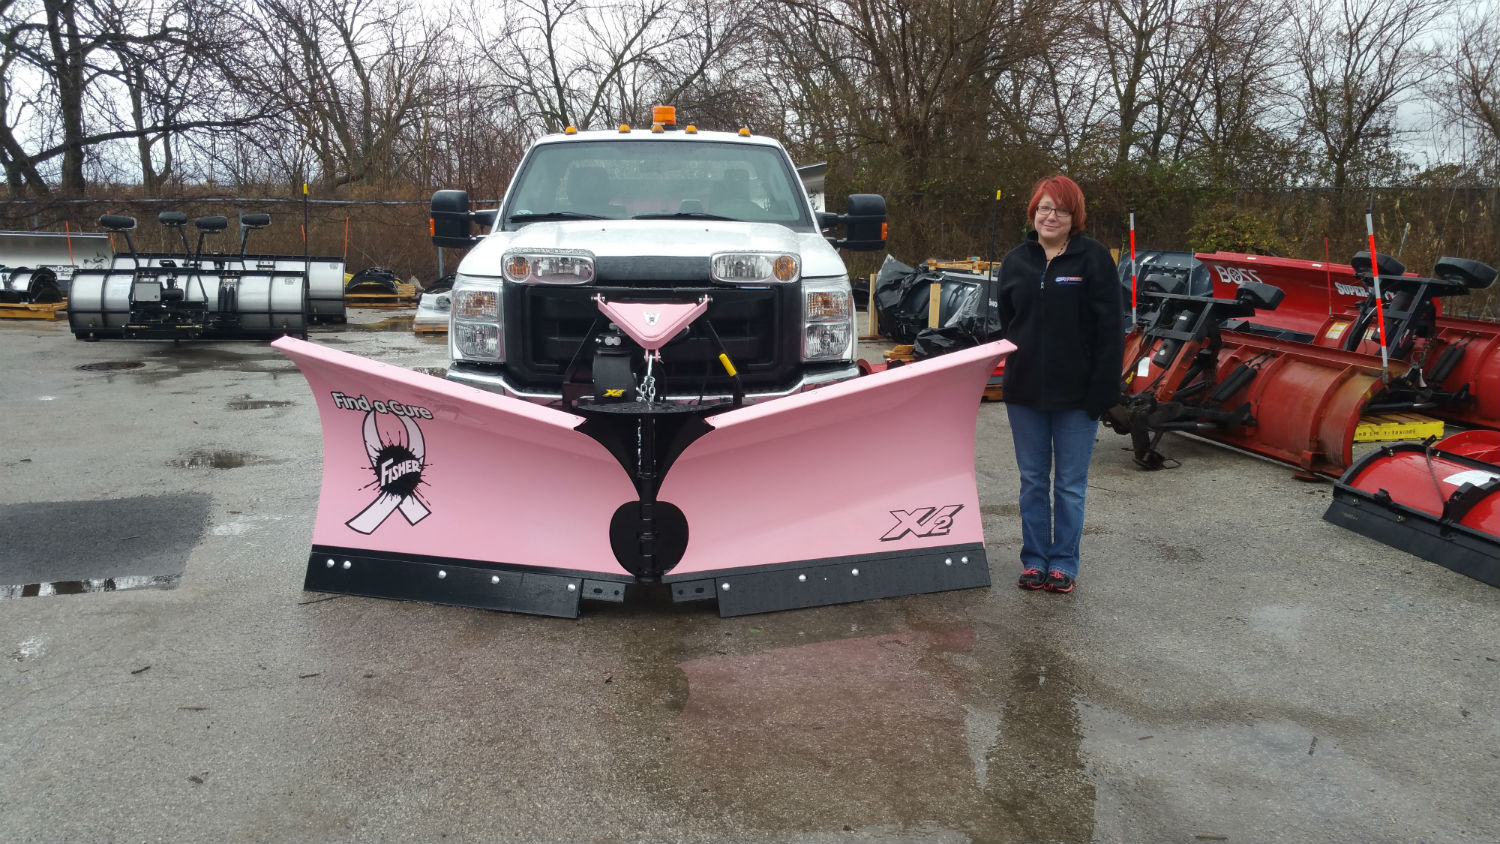 Mary B. standing next to Fisher "Pink Plow"